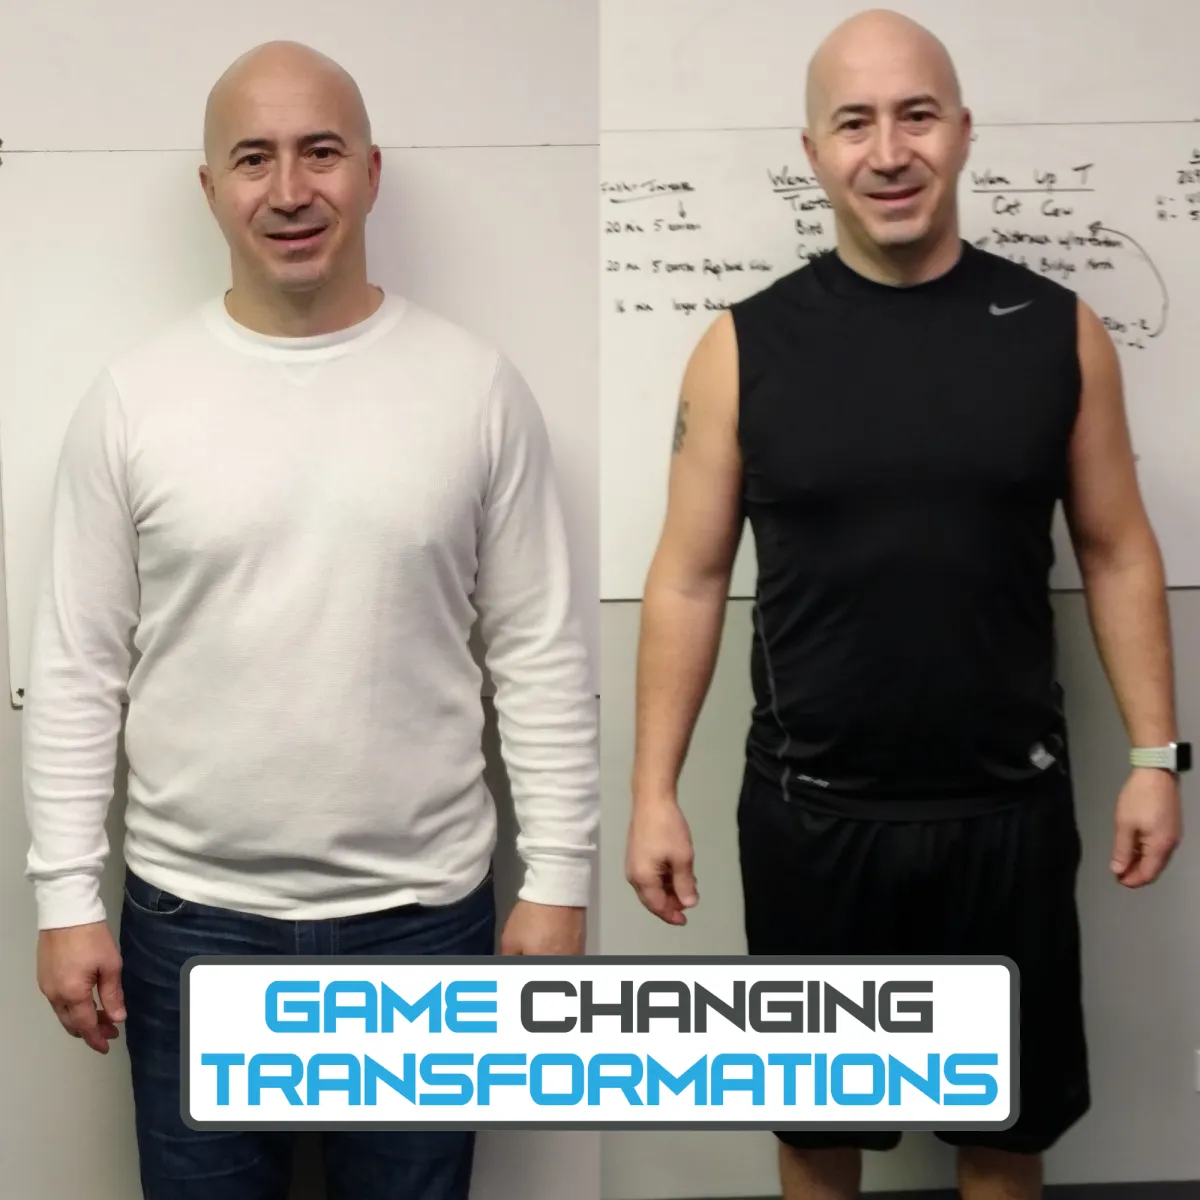 Losing 20 pounds of weight is normal at Game Changing Performance in Mundelein IL